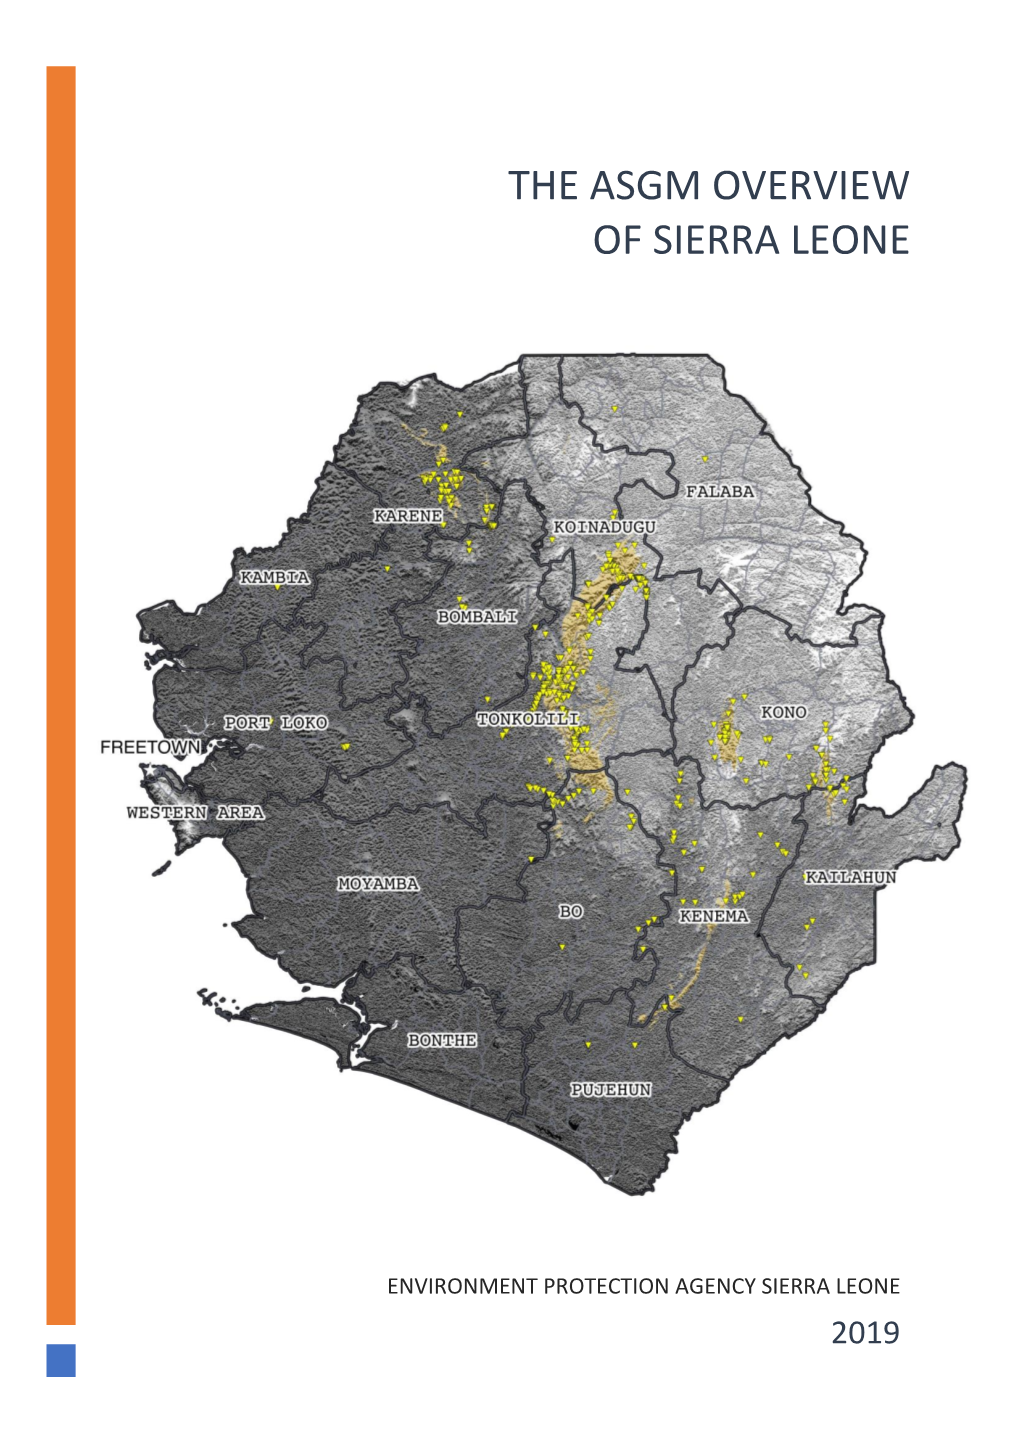 The Asgm Overview of Sierra Leone